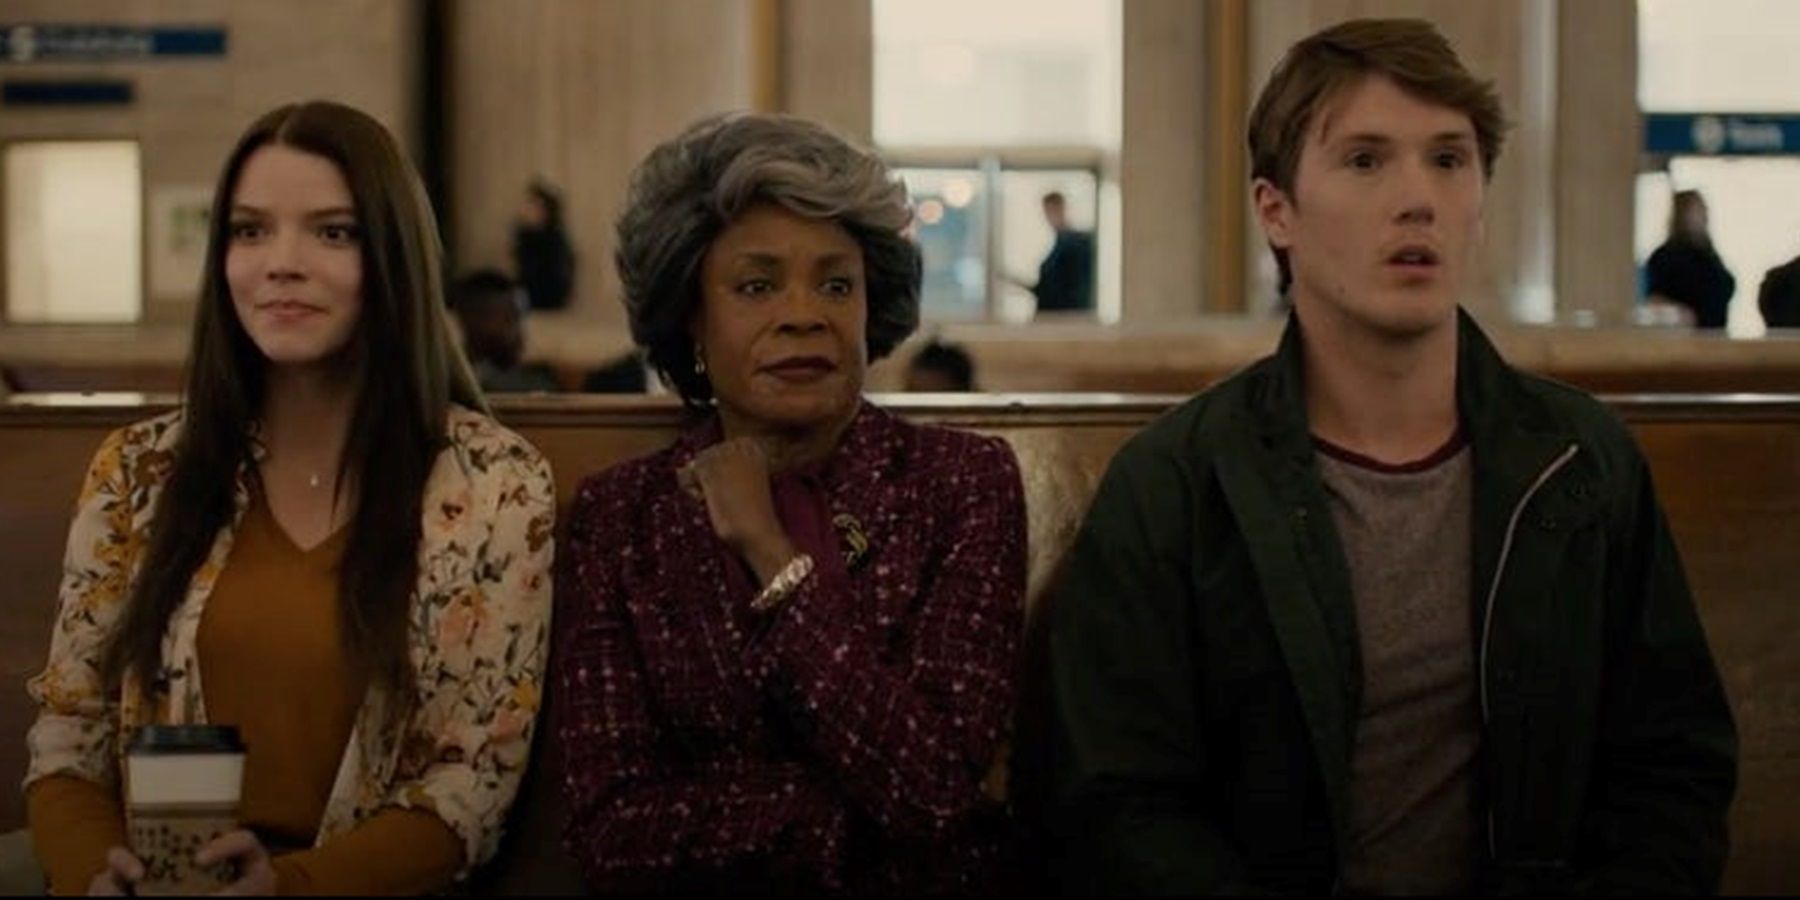 Casey, Mrs Price, and Joseph in a train station in Glass